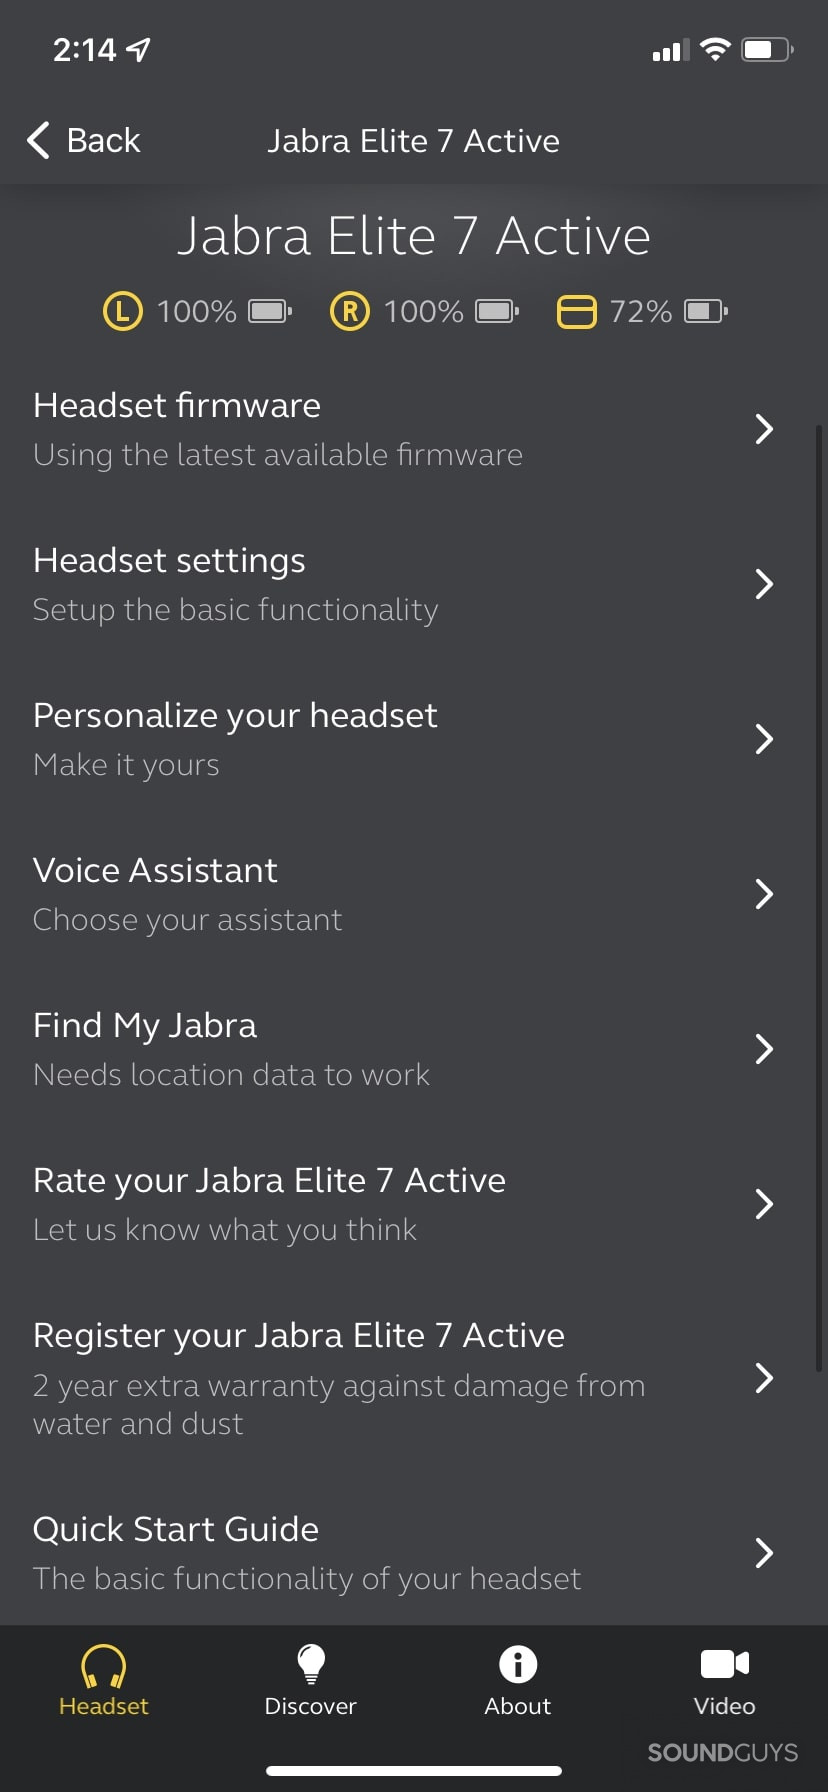 Screenshot of Jabra Elite 7 Active settings within the Sound+ app.